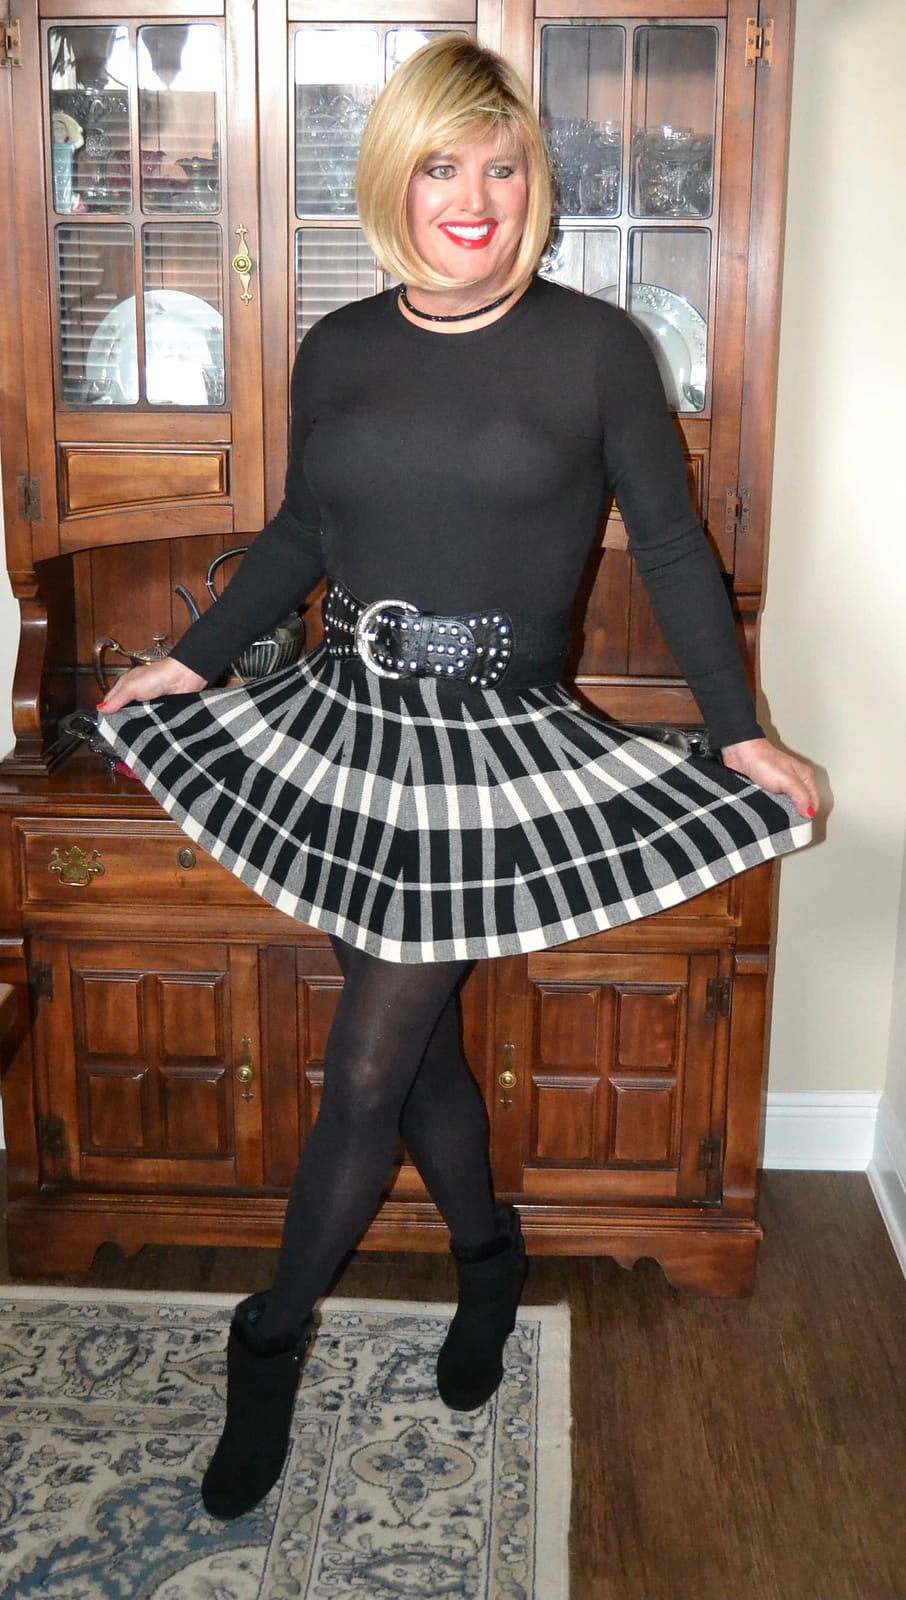 Just Love the Feel of Tights and Ankle Booties! – Crossdresser Heaven